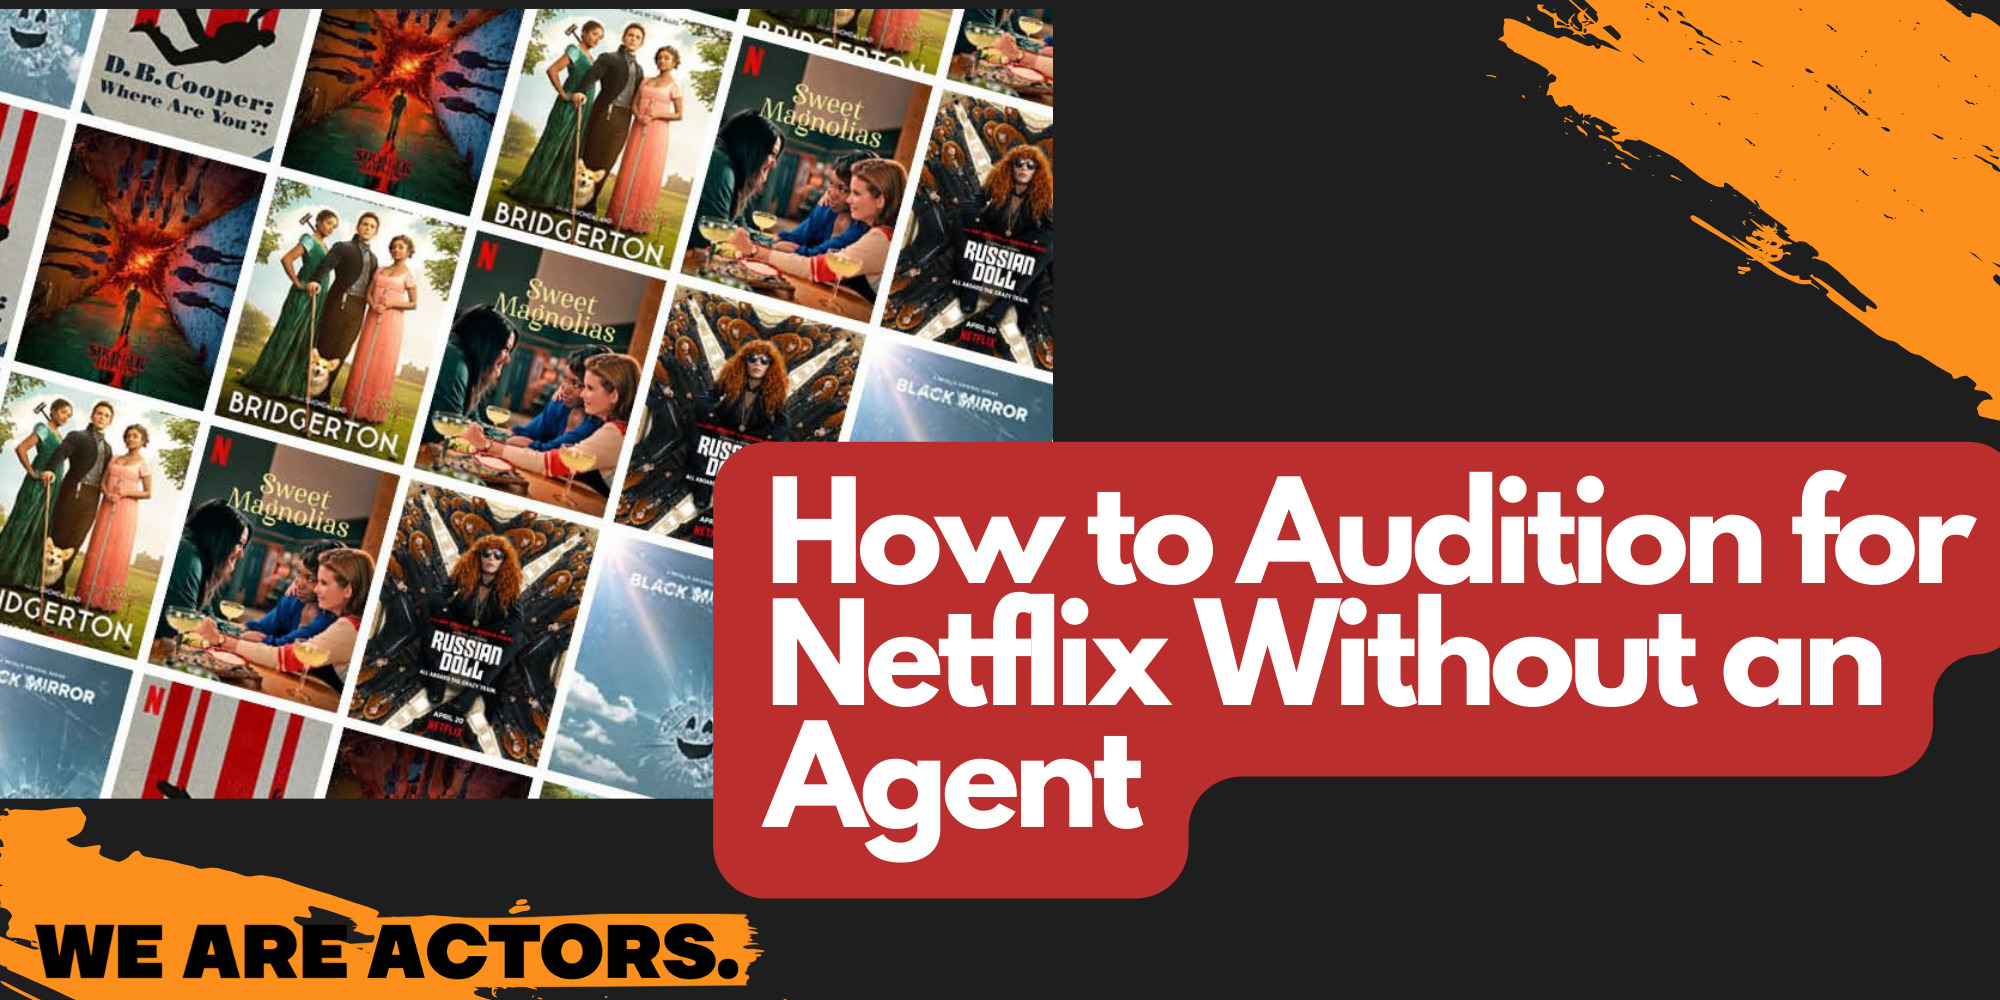 How to Audition for Netflix Without an Agent